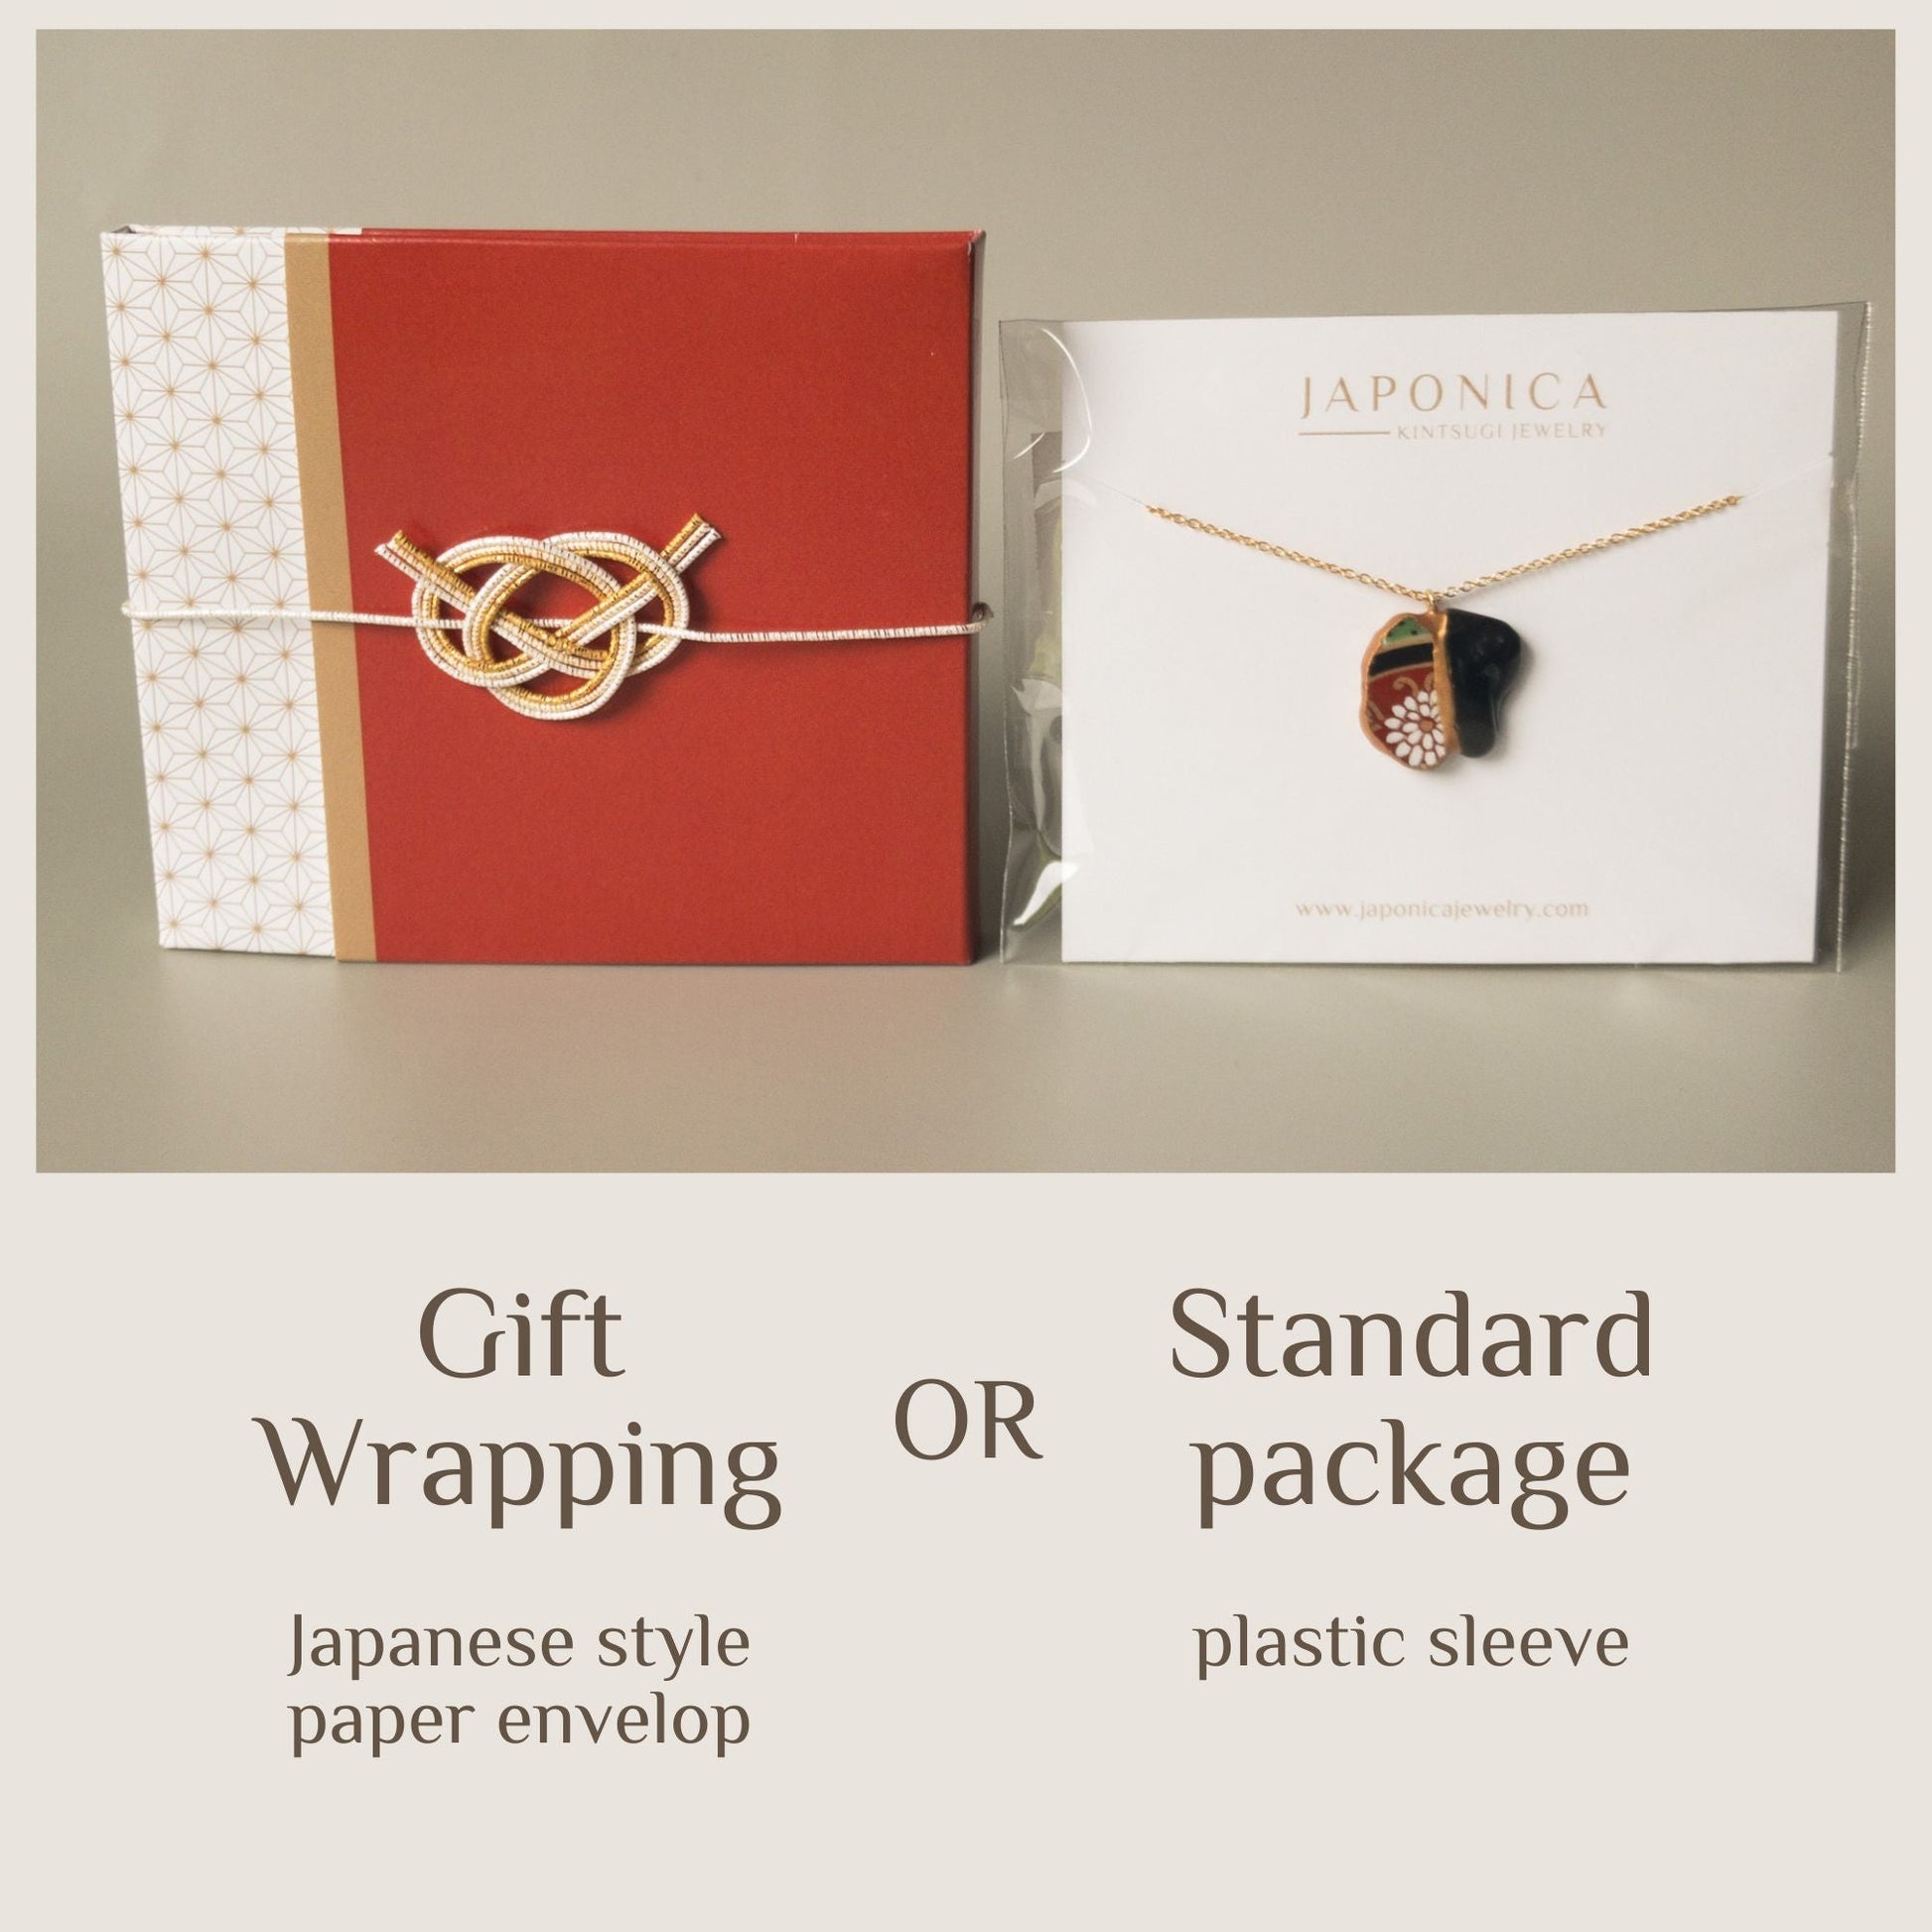 Kintsugi jewelry gift wrapping vs standard package